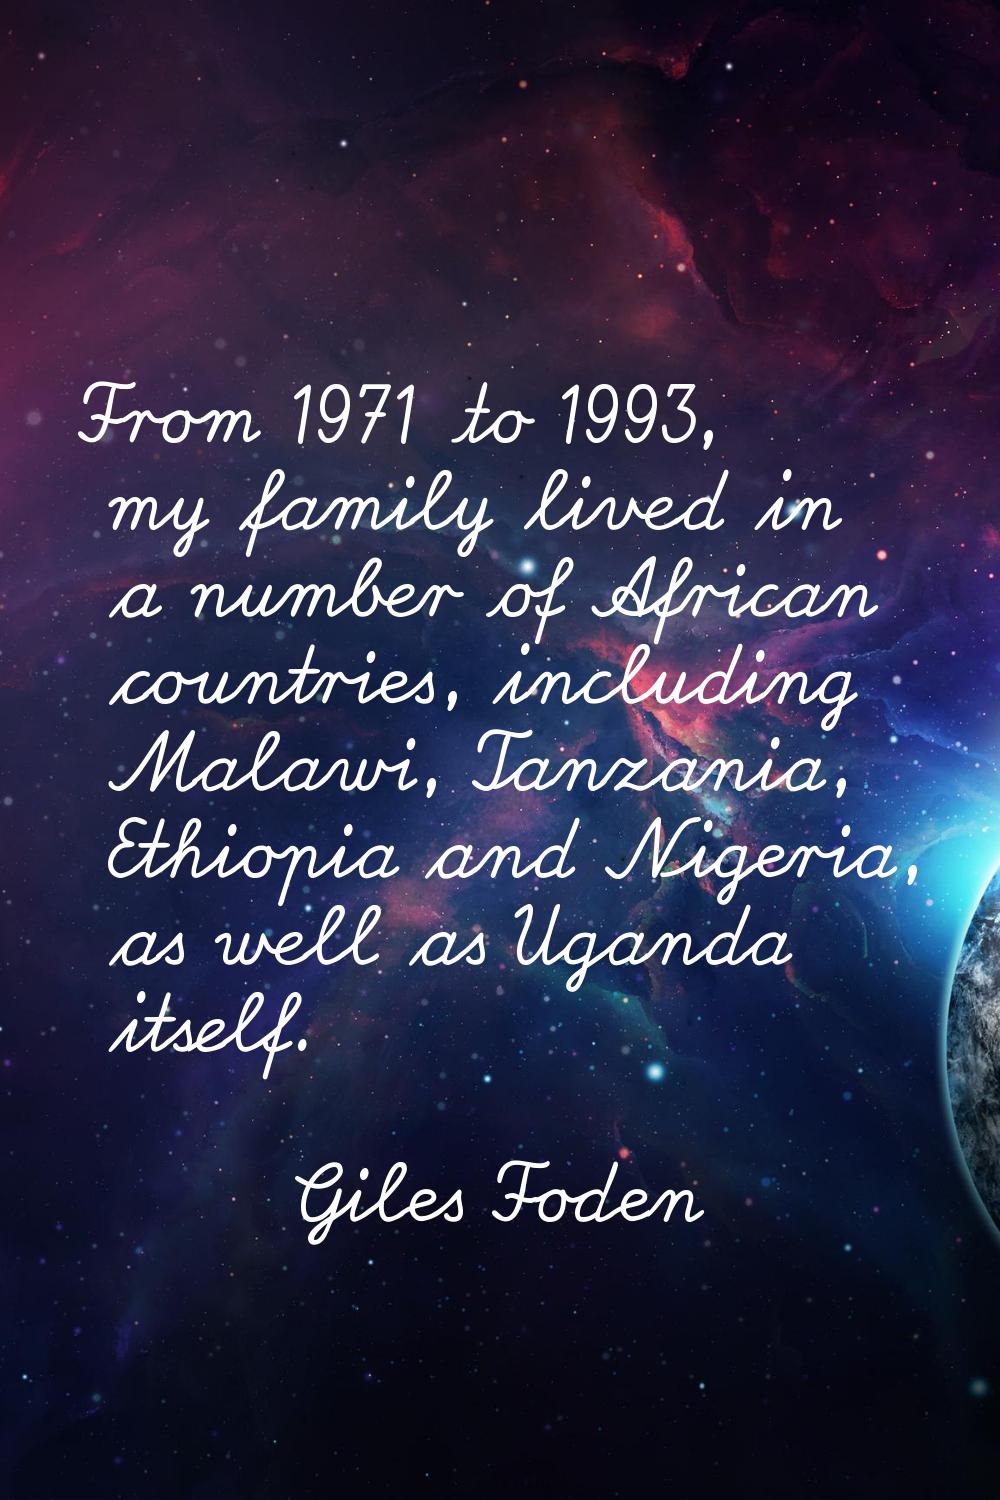 From 1971 to 1993, my family lived in a number of African countries, including Malawi, Tanzania, Et